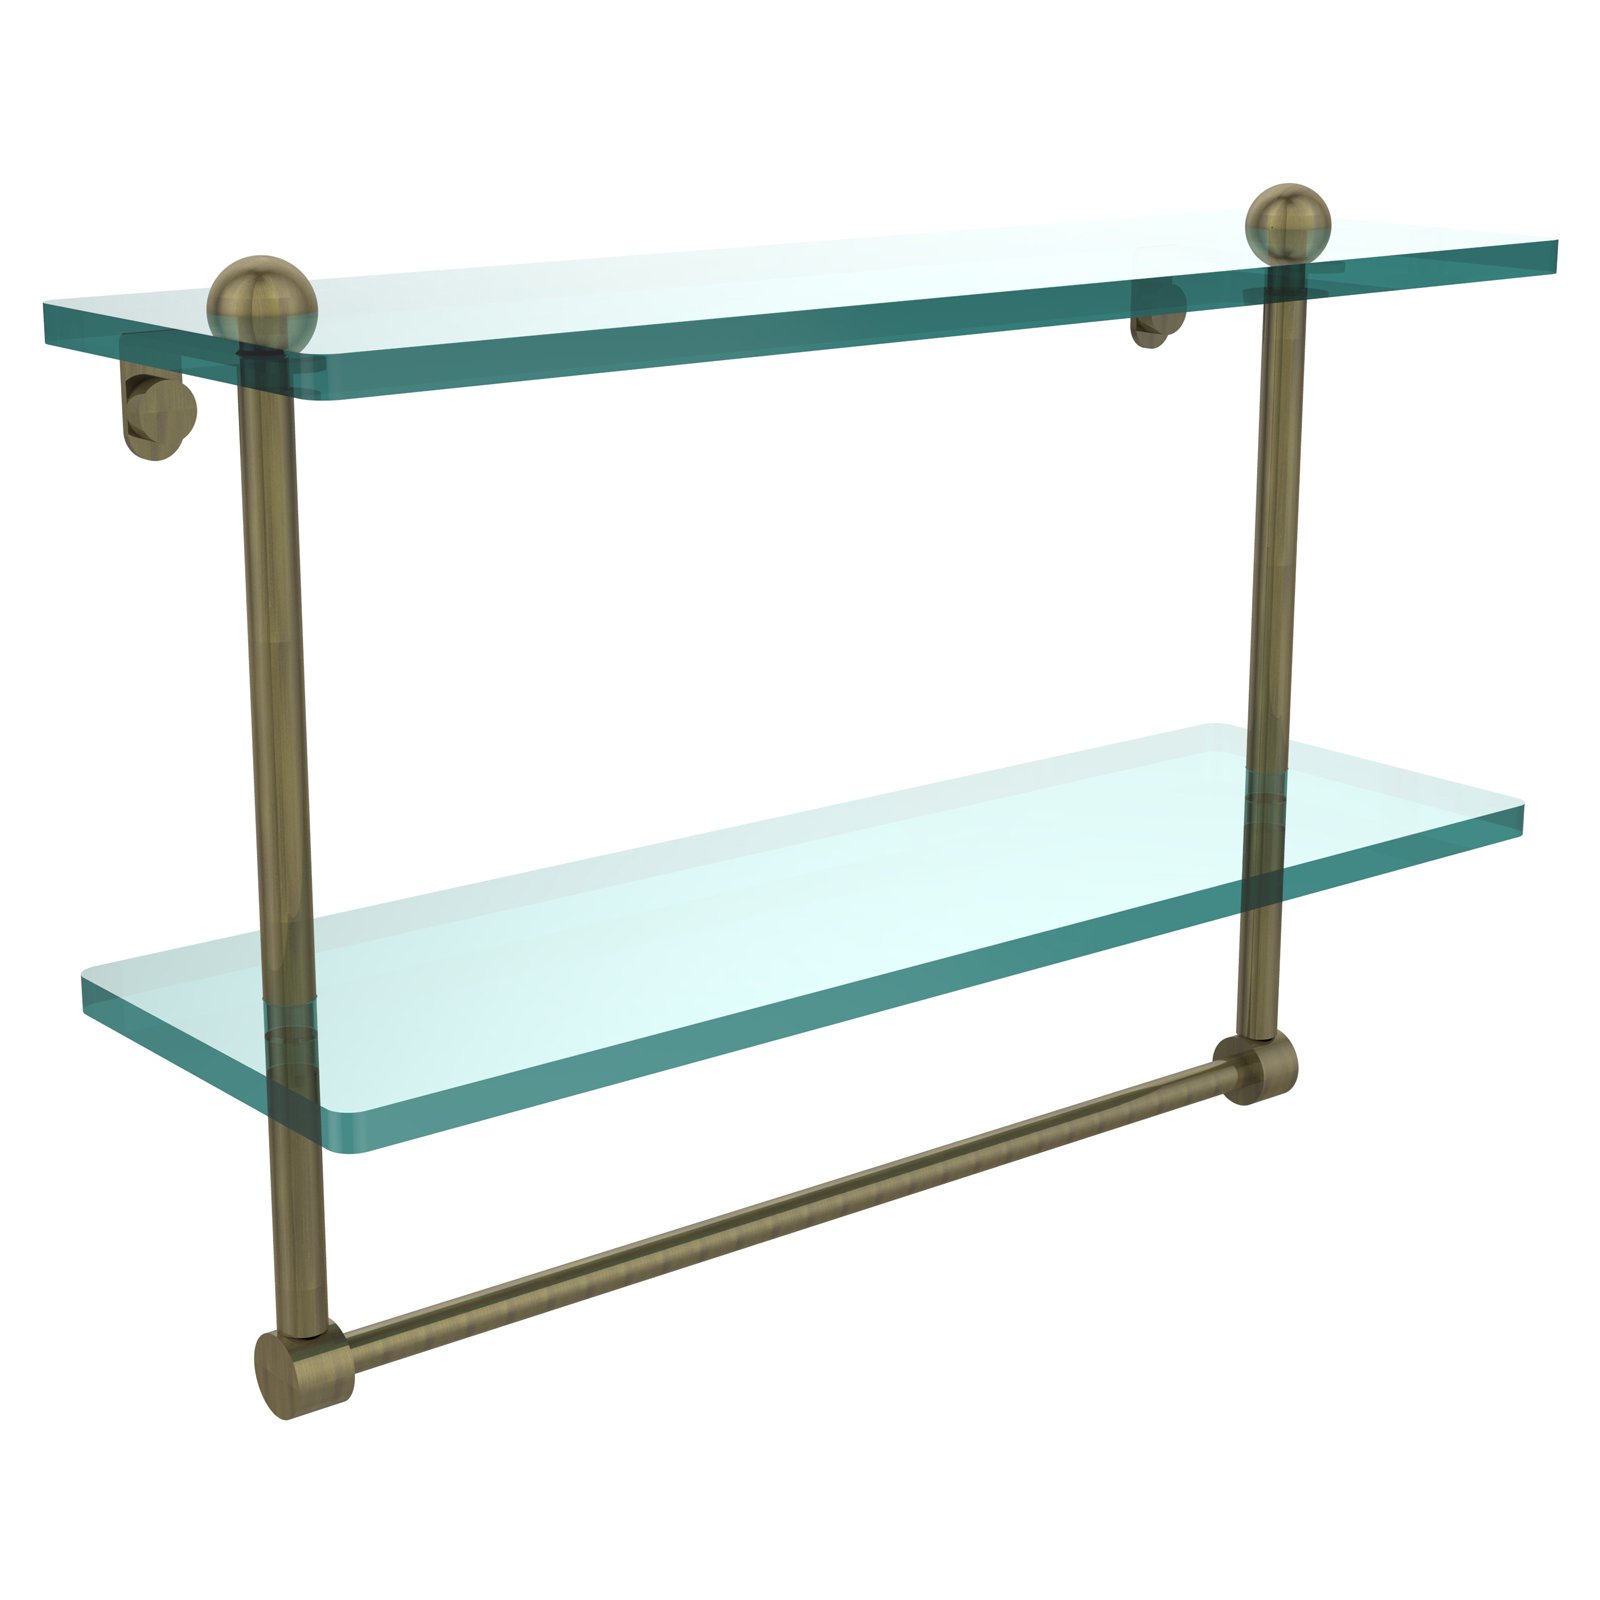 22-in Two Tiered Glass Shelf with Integrated Towel Bar in Satin Nickel - image 2 of 2